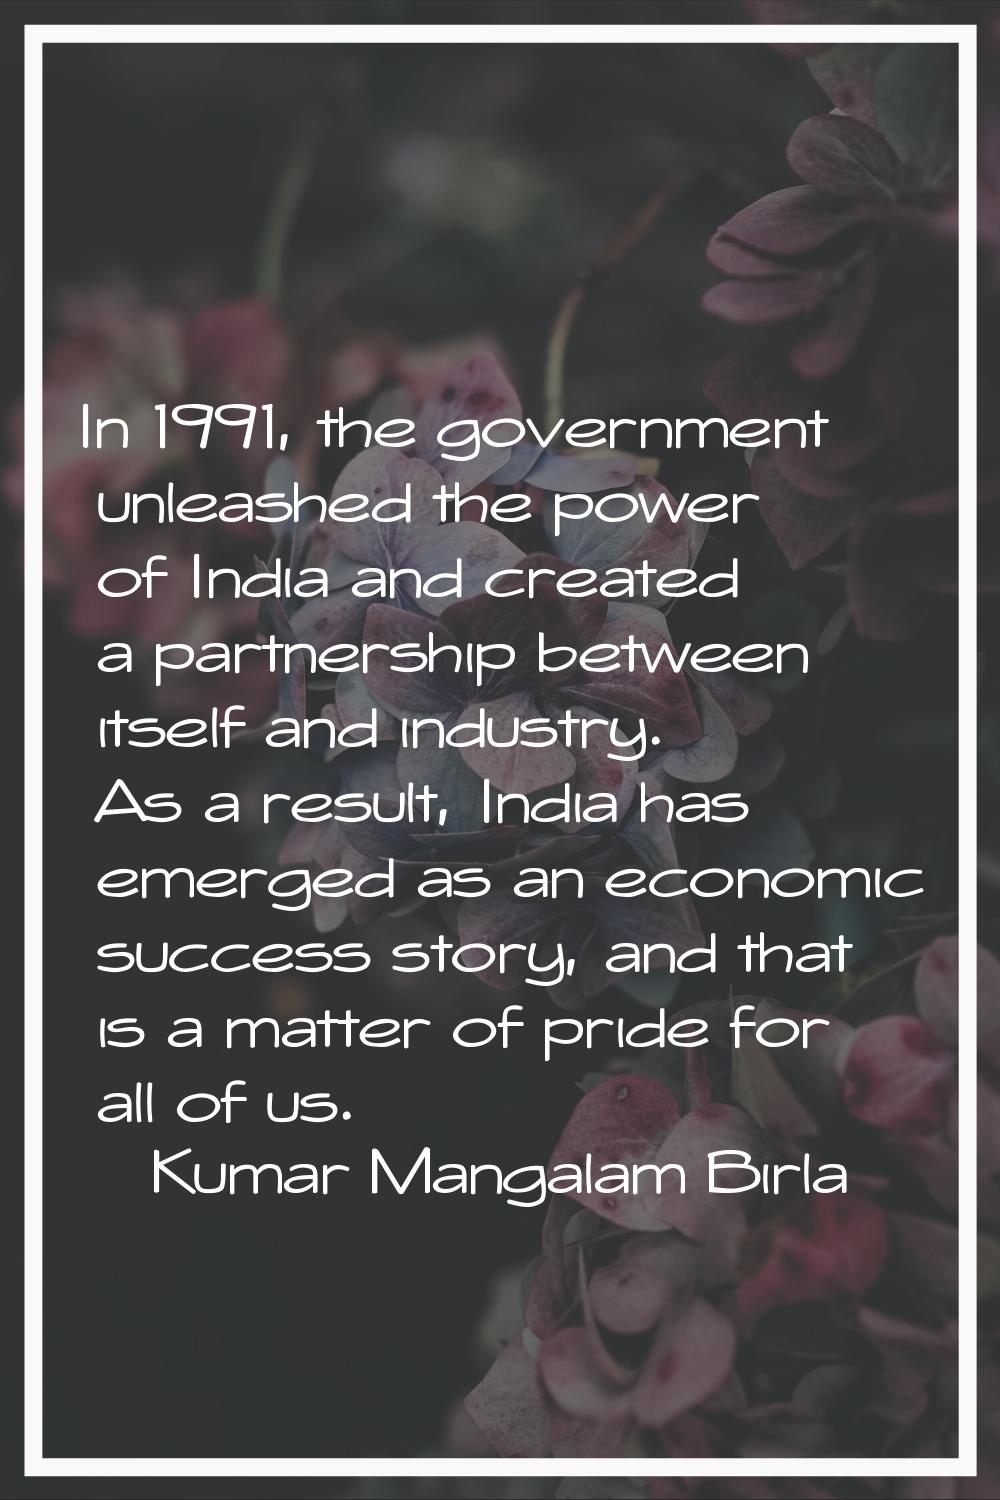 In 1991, the government unleashed the power of India and created a partnership between itself and i